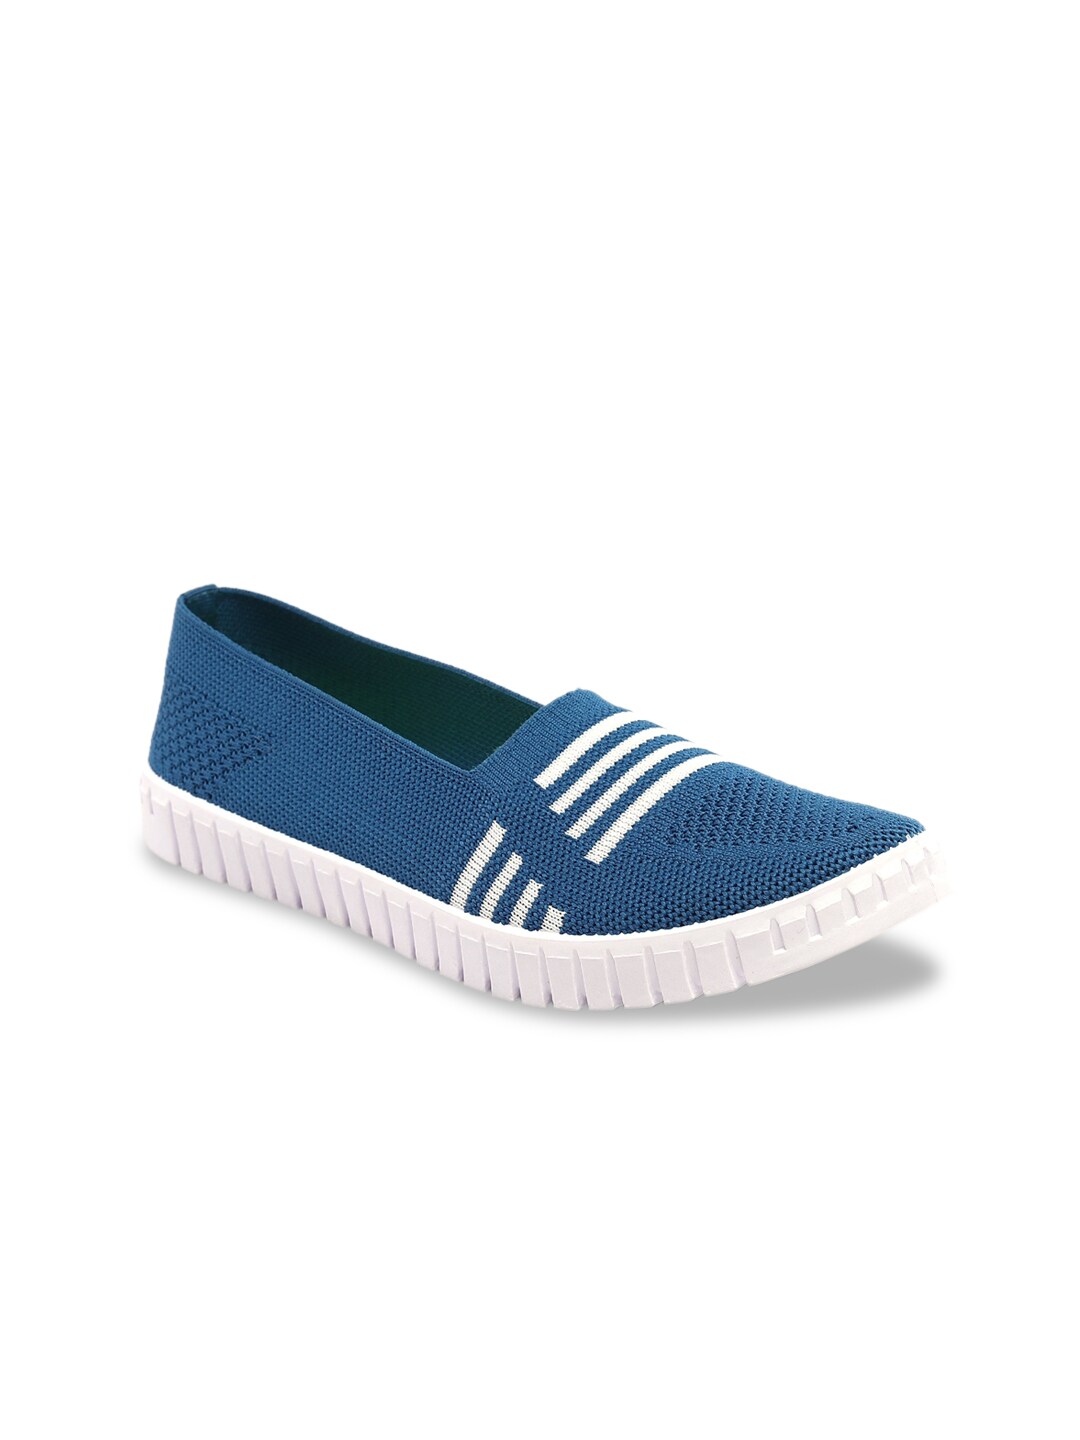 Champs Women Turquoise Blue Woven Design Slip-On Sneakers Price in India